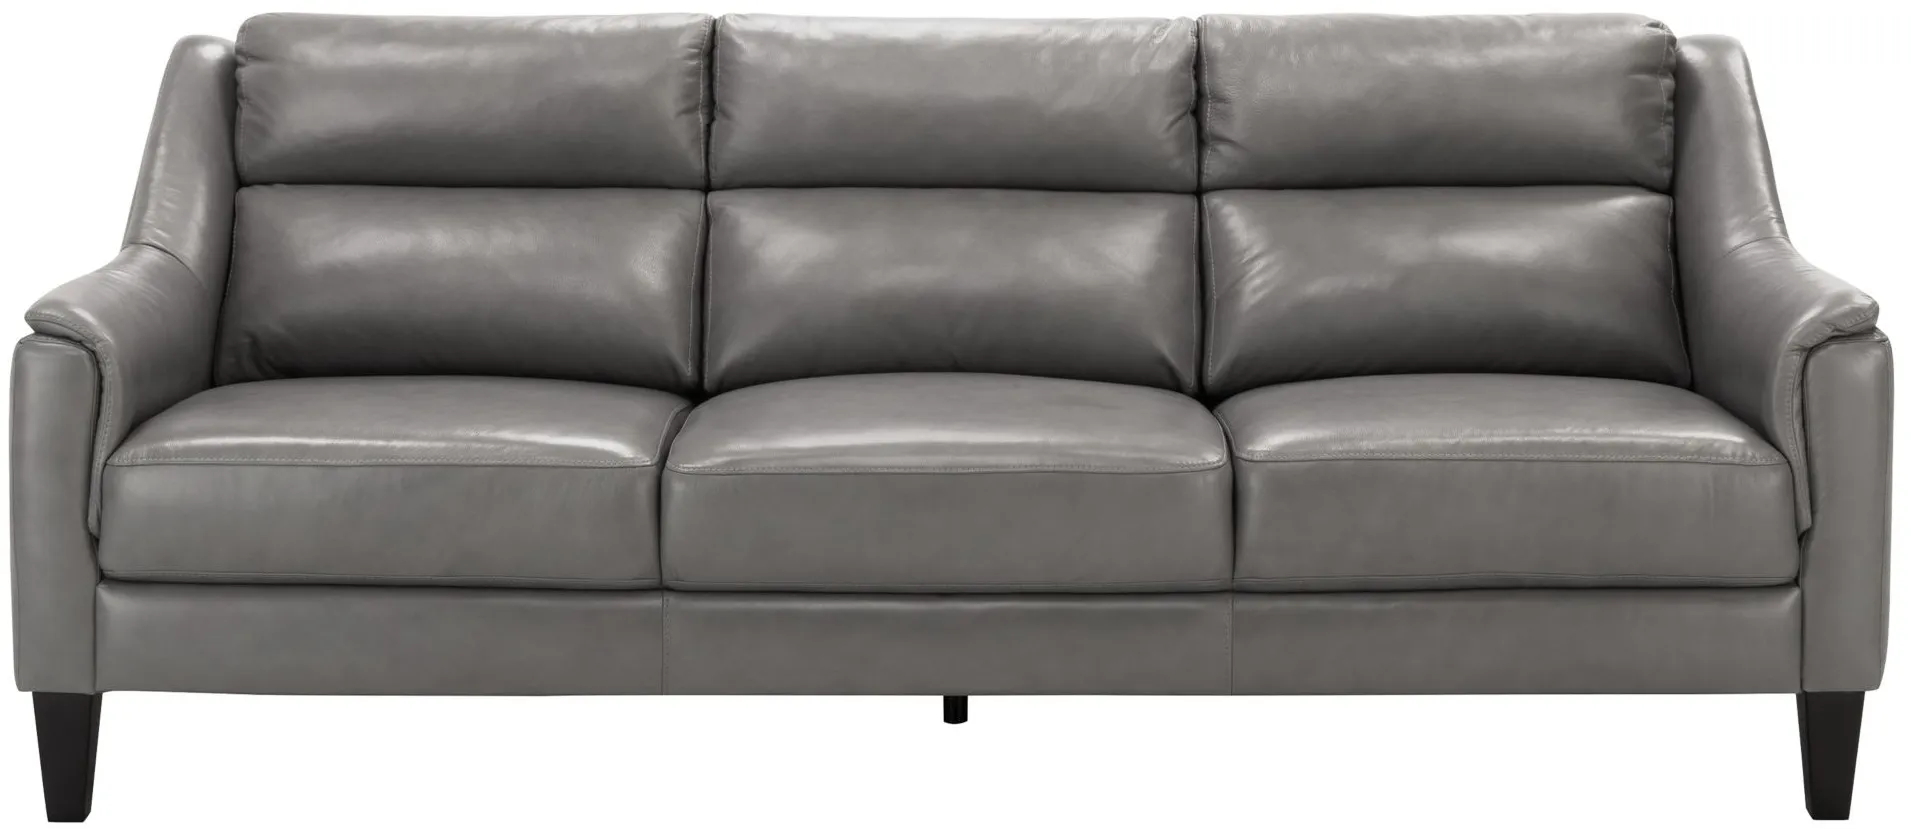 Rowen Sofa in Pewter by Chateau D'Ax